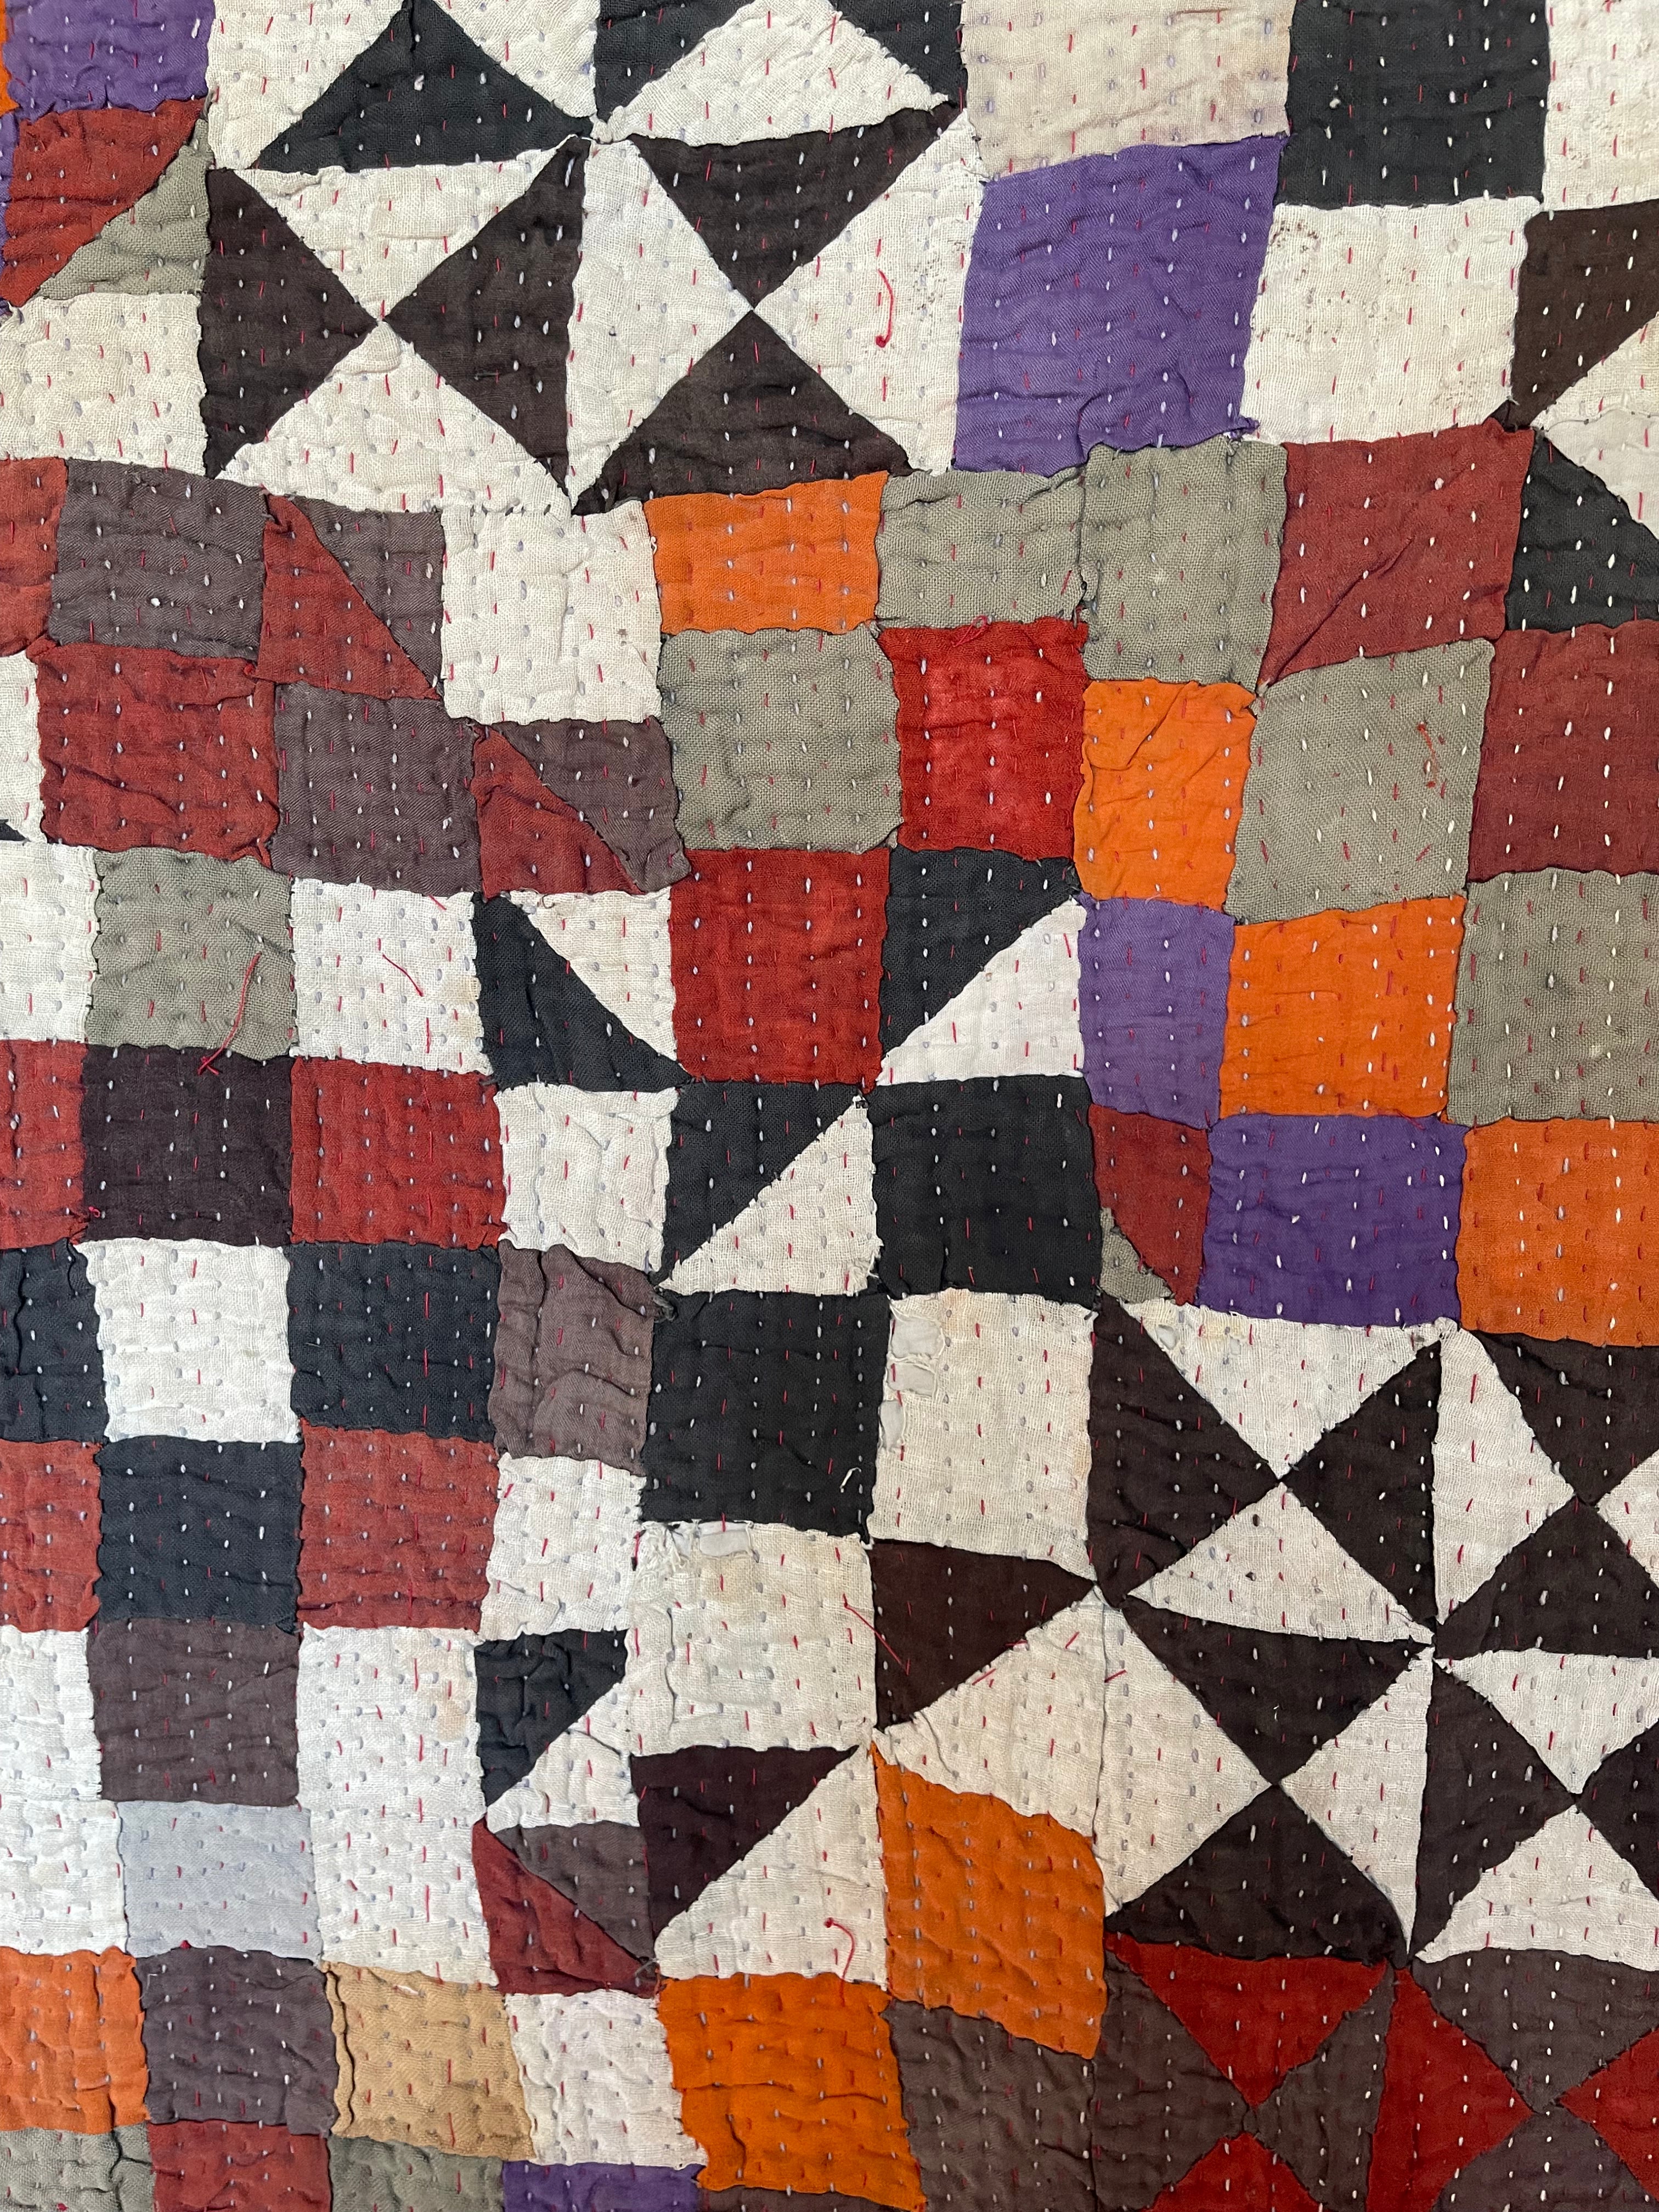 This particular quilt has an unusual combination of triangles and sqaures creating an enchanting and visually disruptive pattern. The reverse a vintage handblock printed piece of fabric that looks like coffee pots printed on the diagonal.